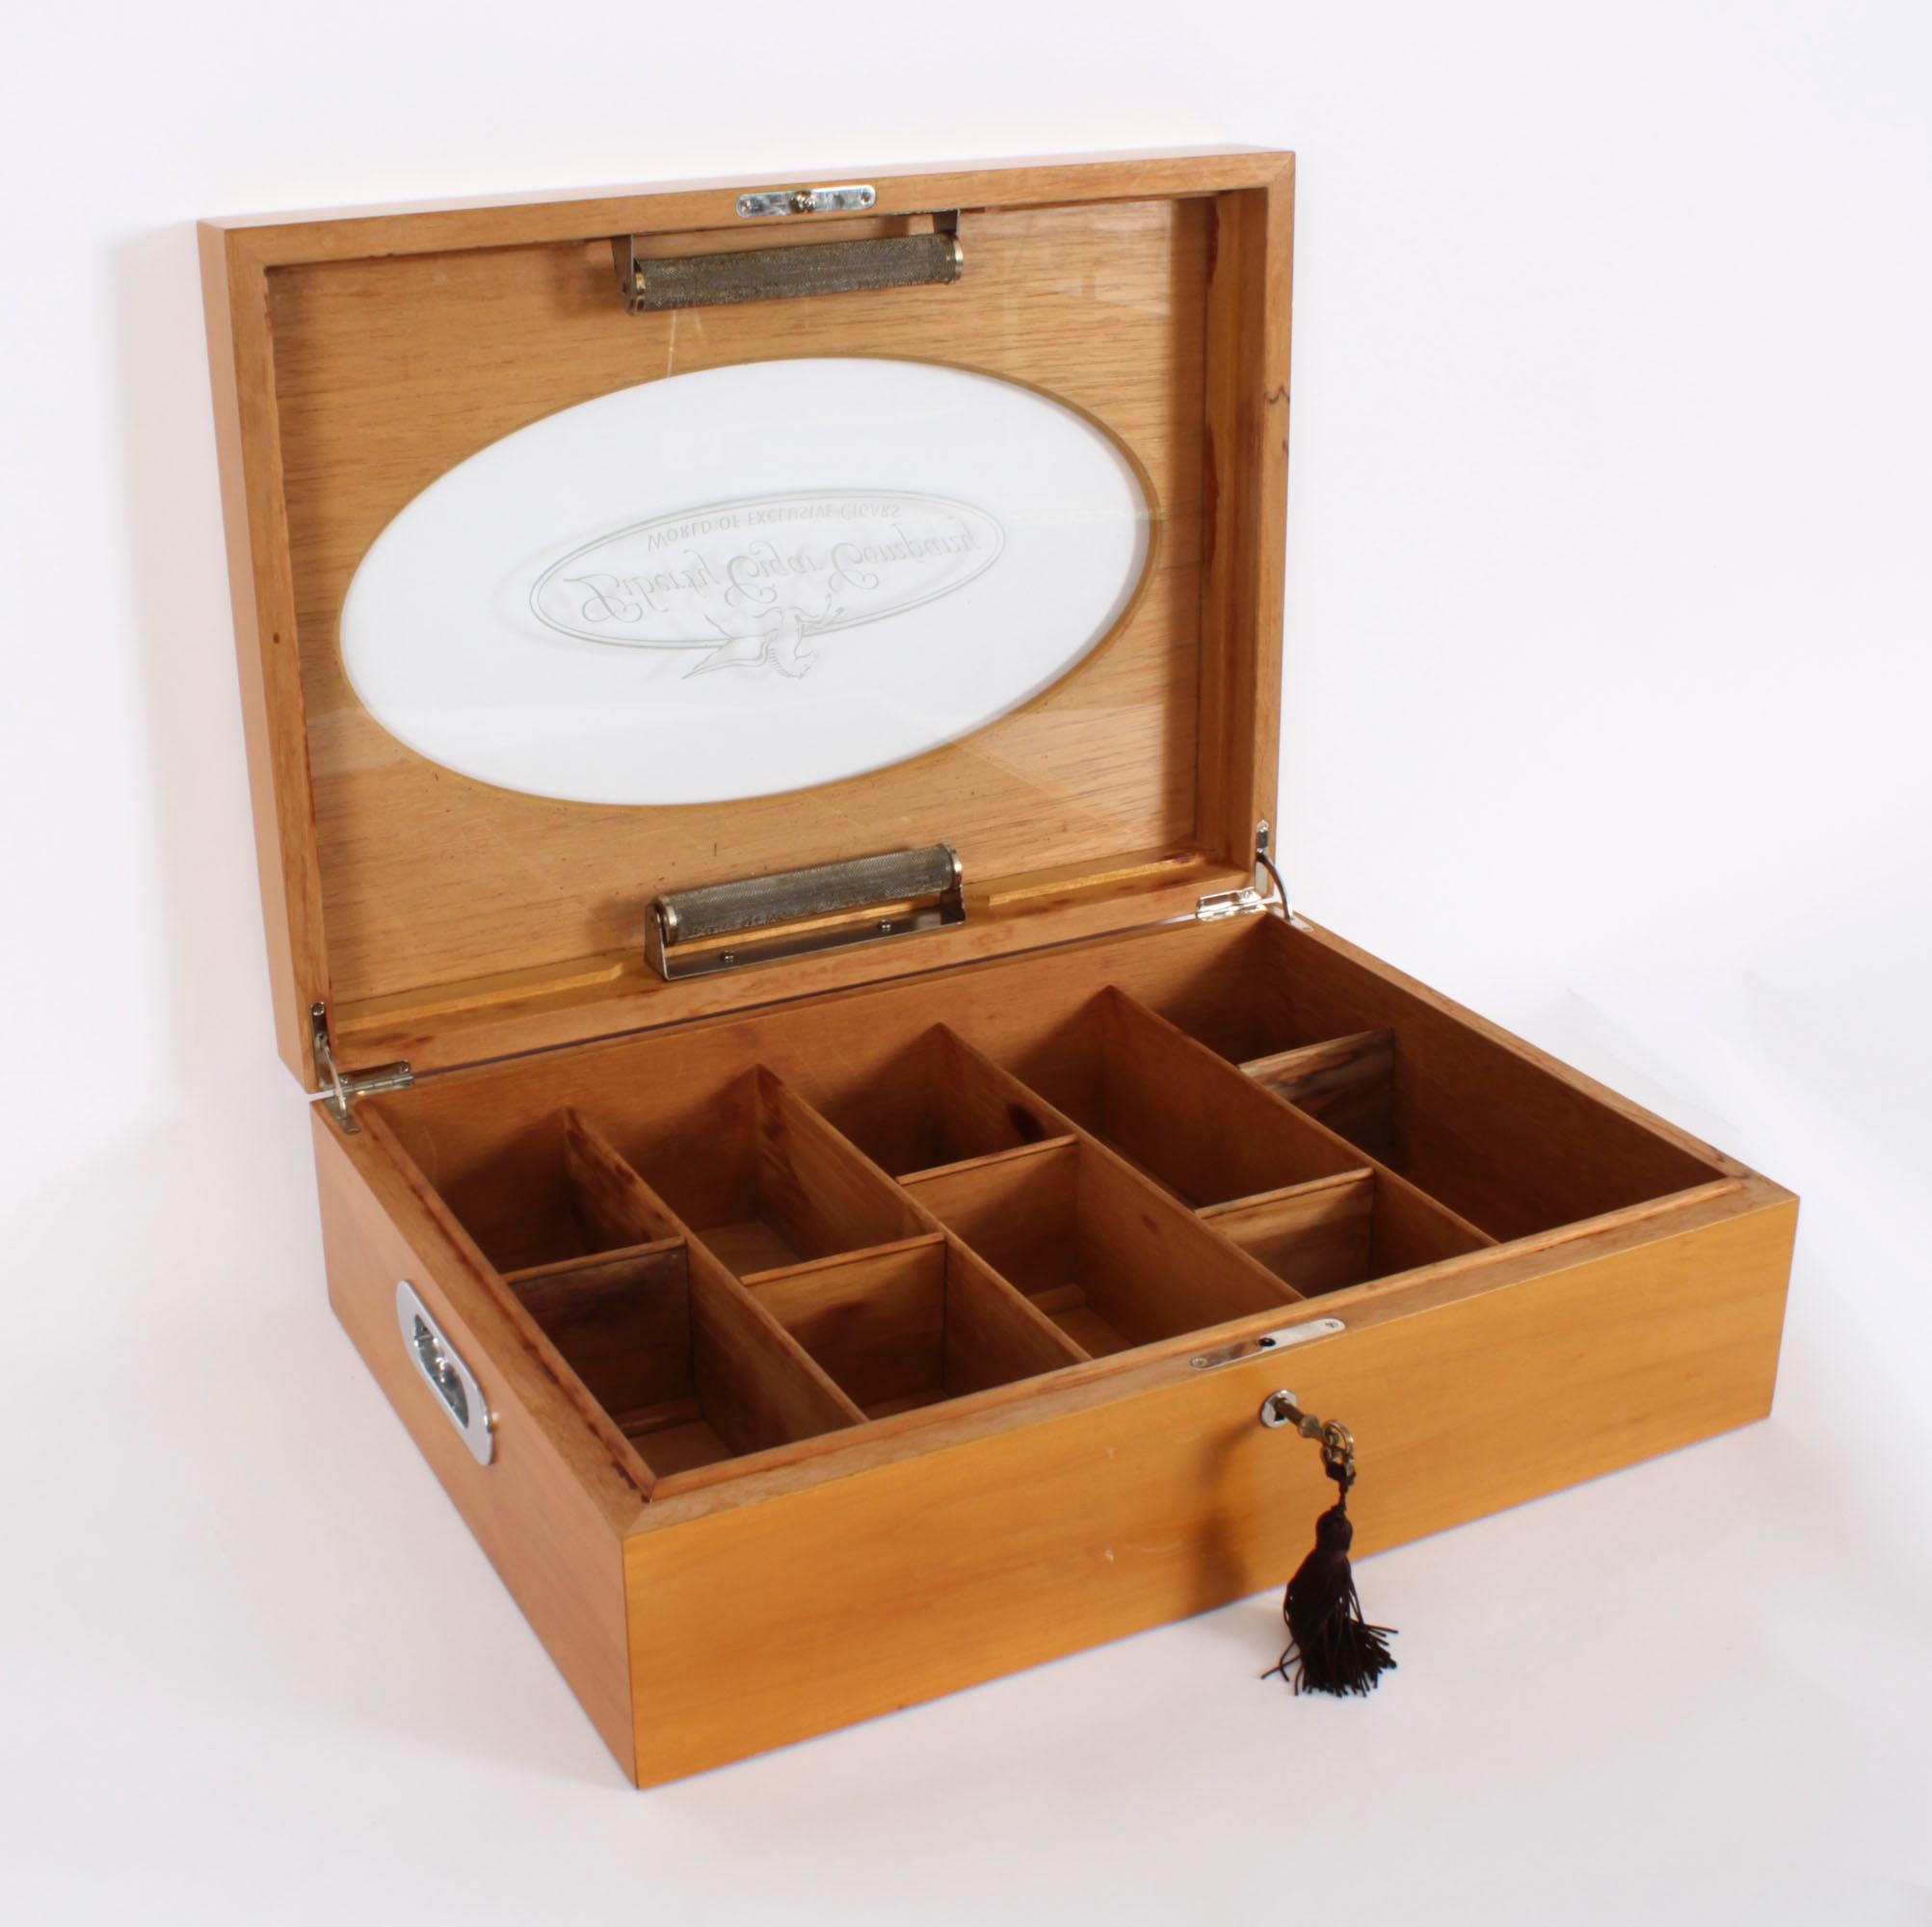 An elegant Vintage English  fruitwood humidor with fitted interior, mid 20th century in date.

The rectangular humidor features a hinged lid having an oval cut out with a glass viewing panel that bears the logo for the 